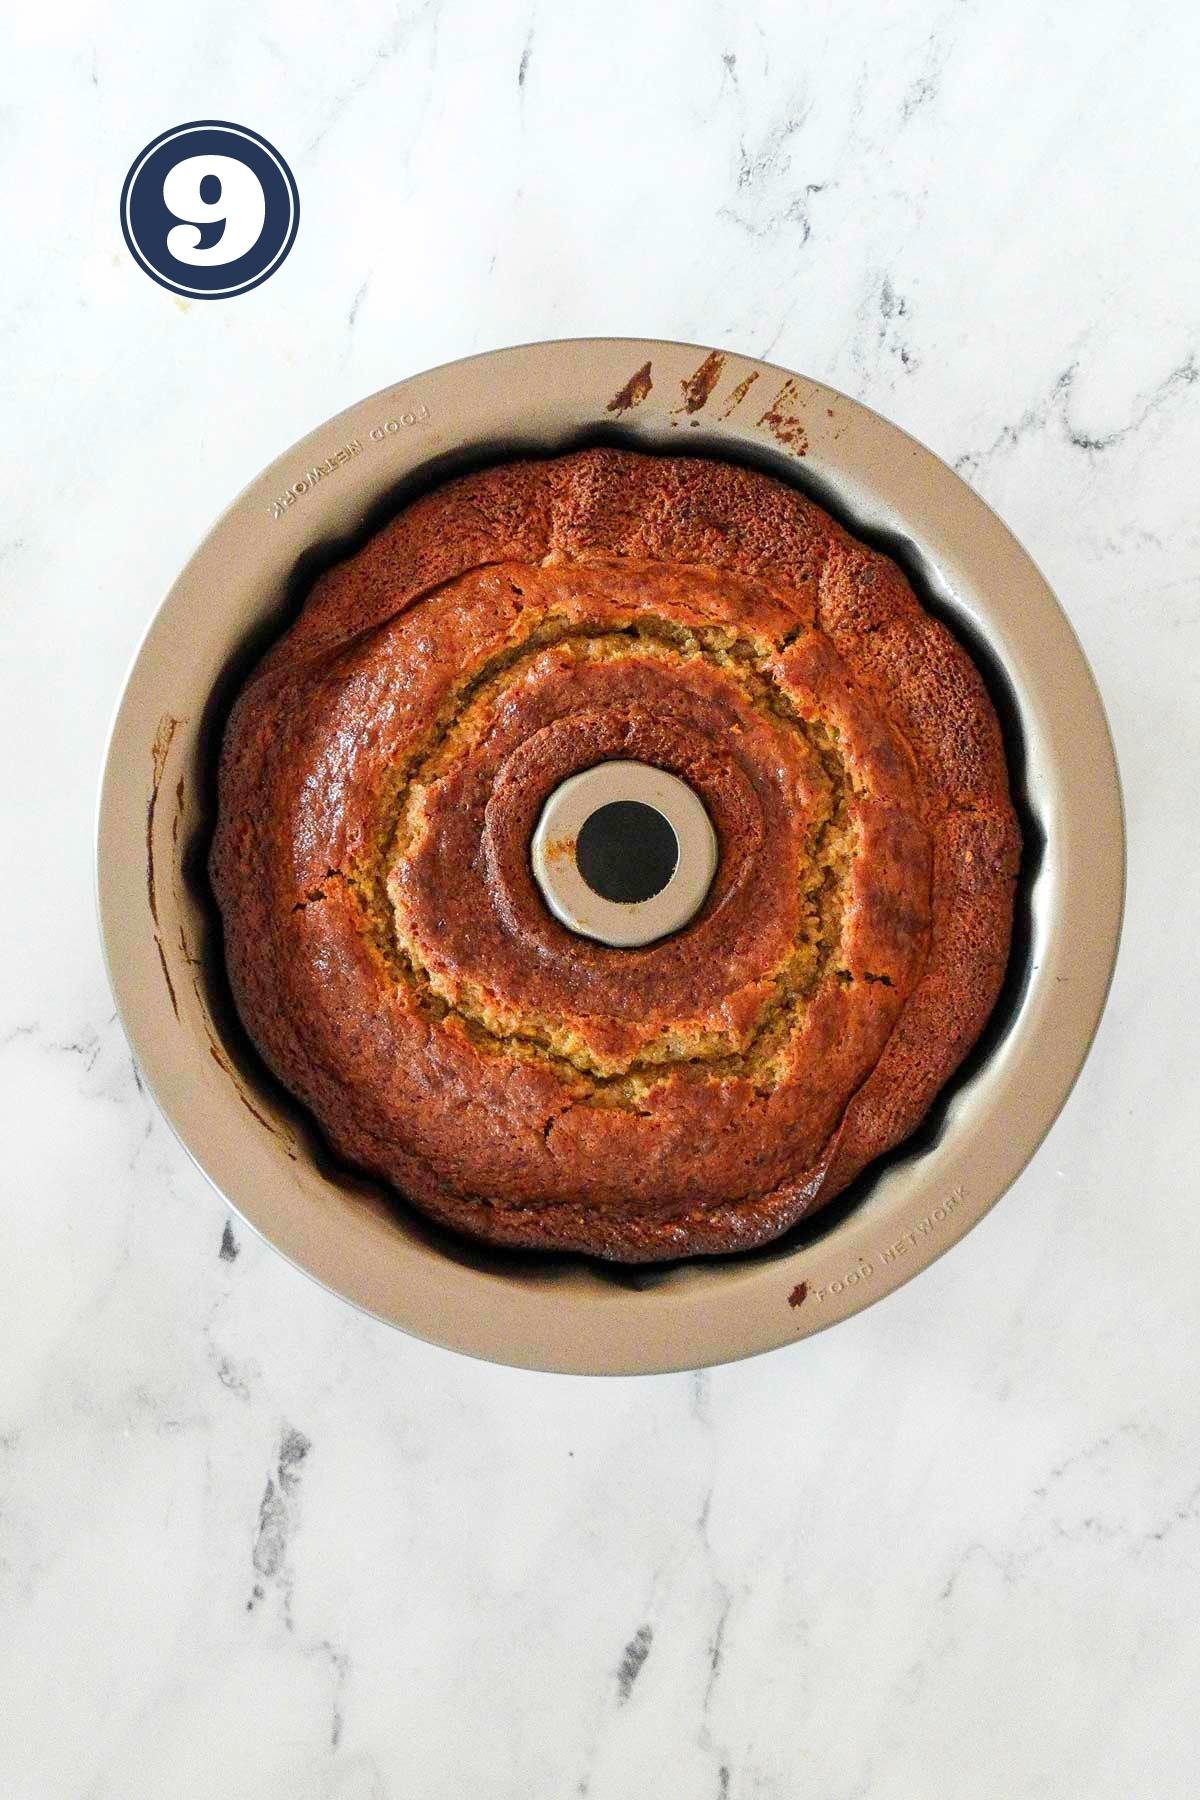 banana chocolate chip bundt cake out of the oven in the pan.